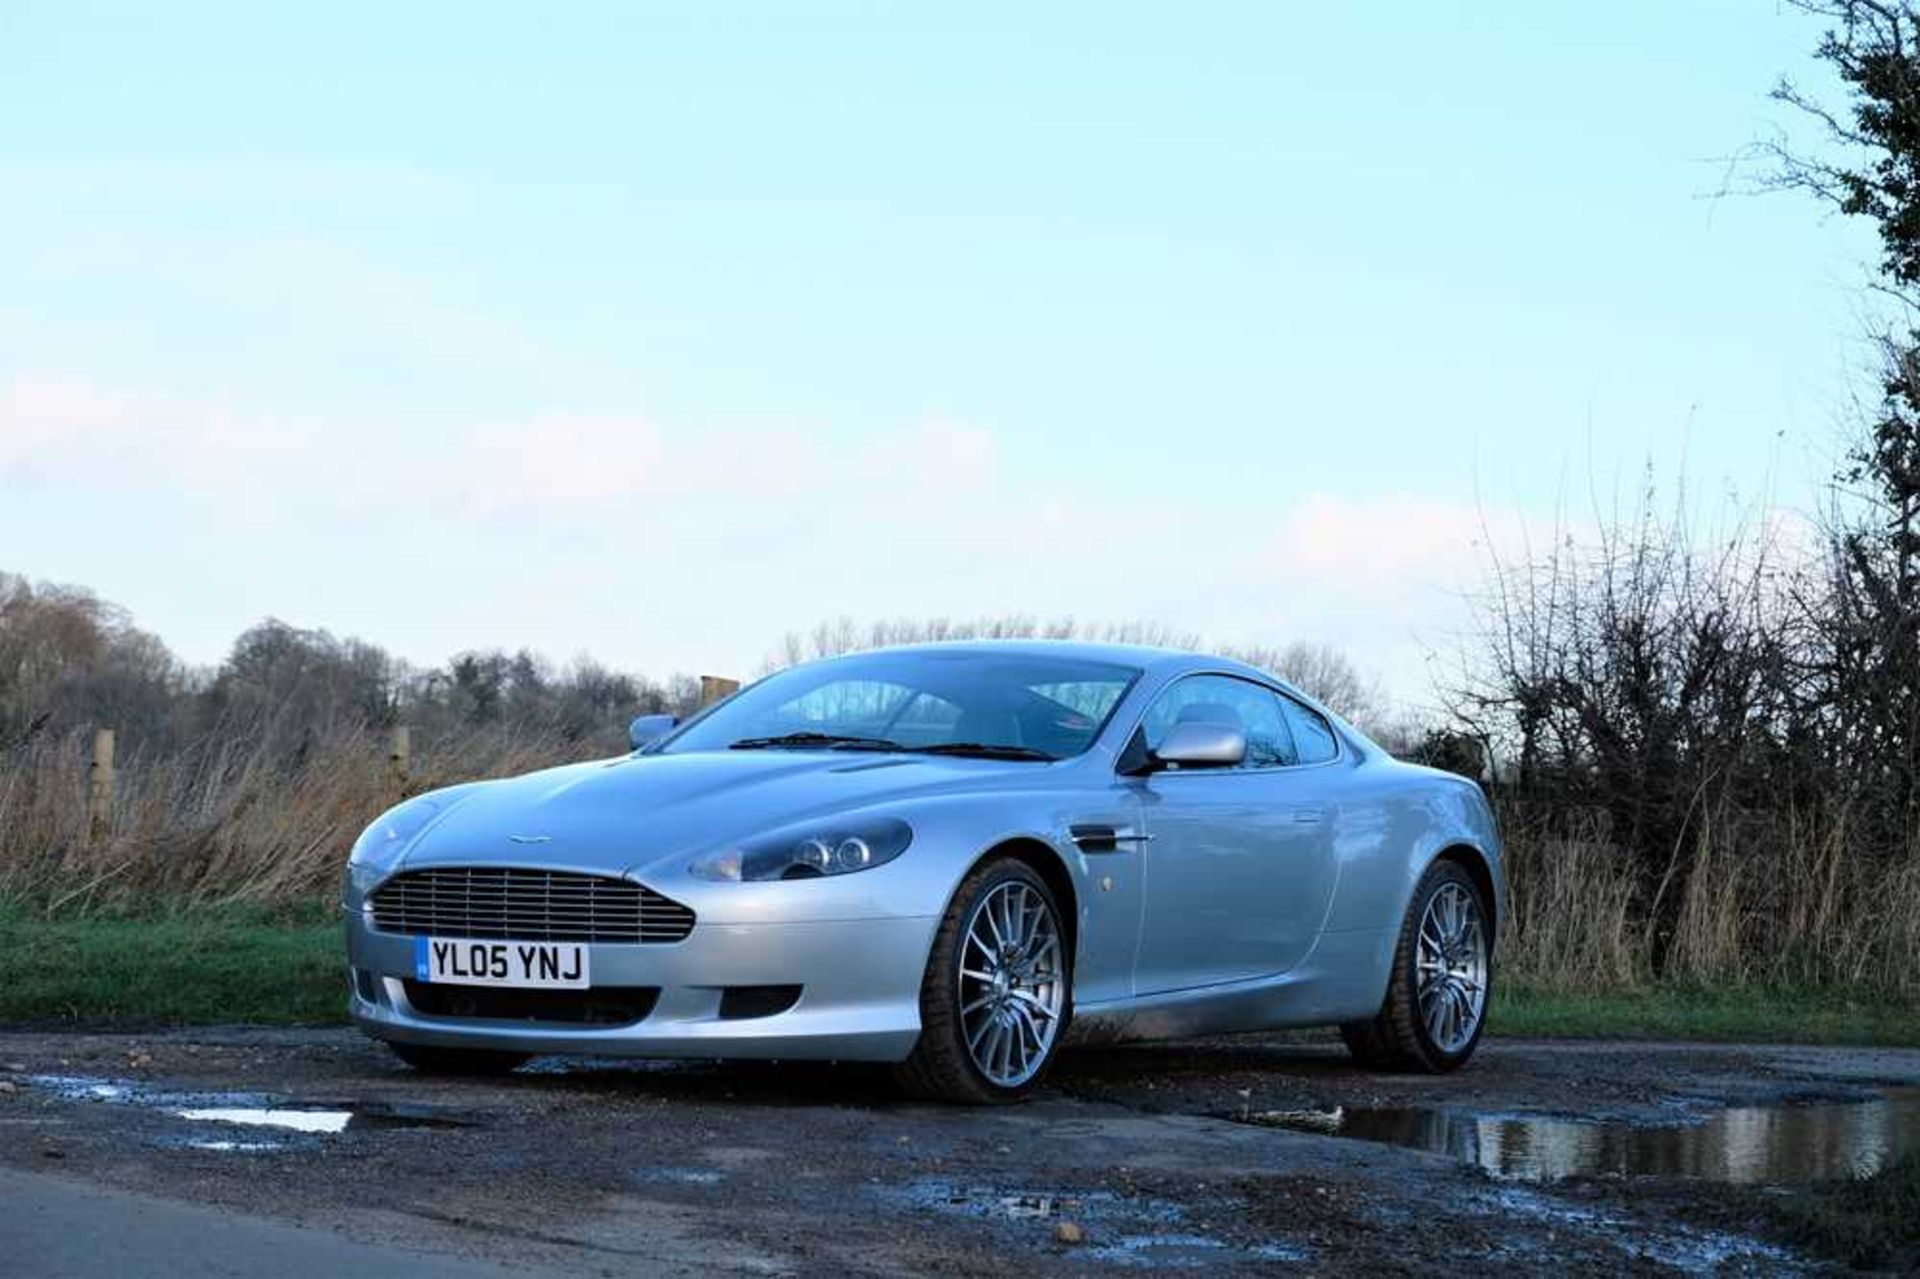 2005 Aston Martin DB9 c.25,000 from new and 4 former keepers - Image 14 of 59